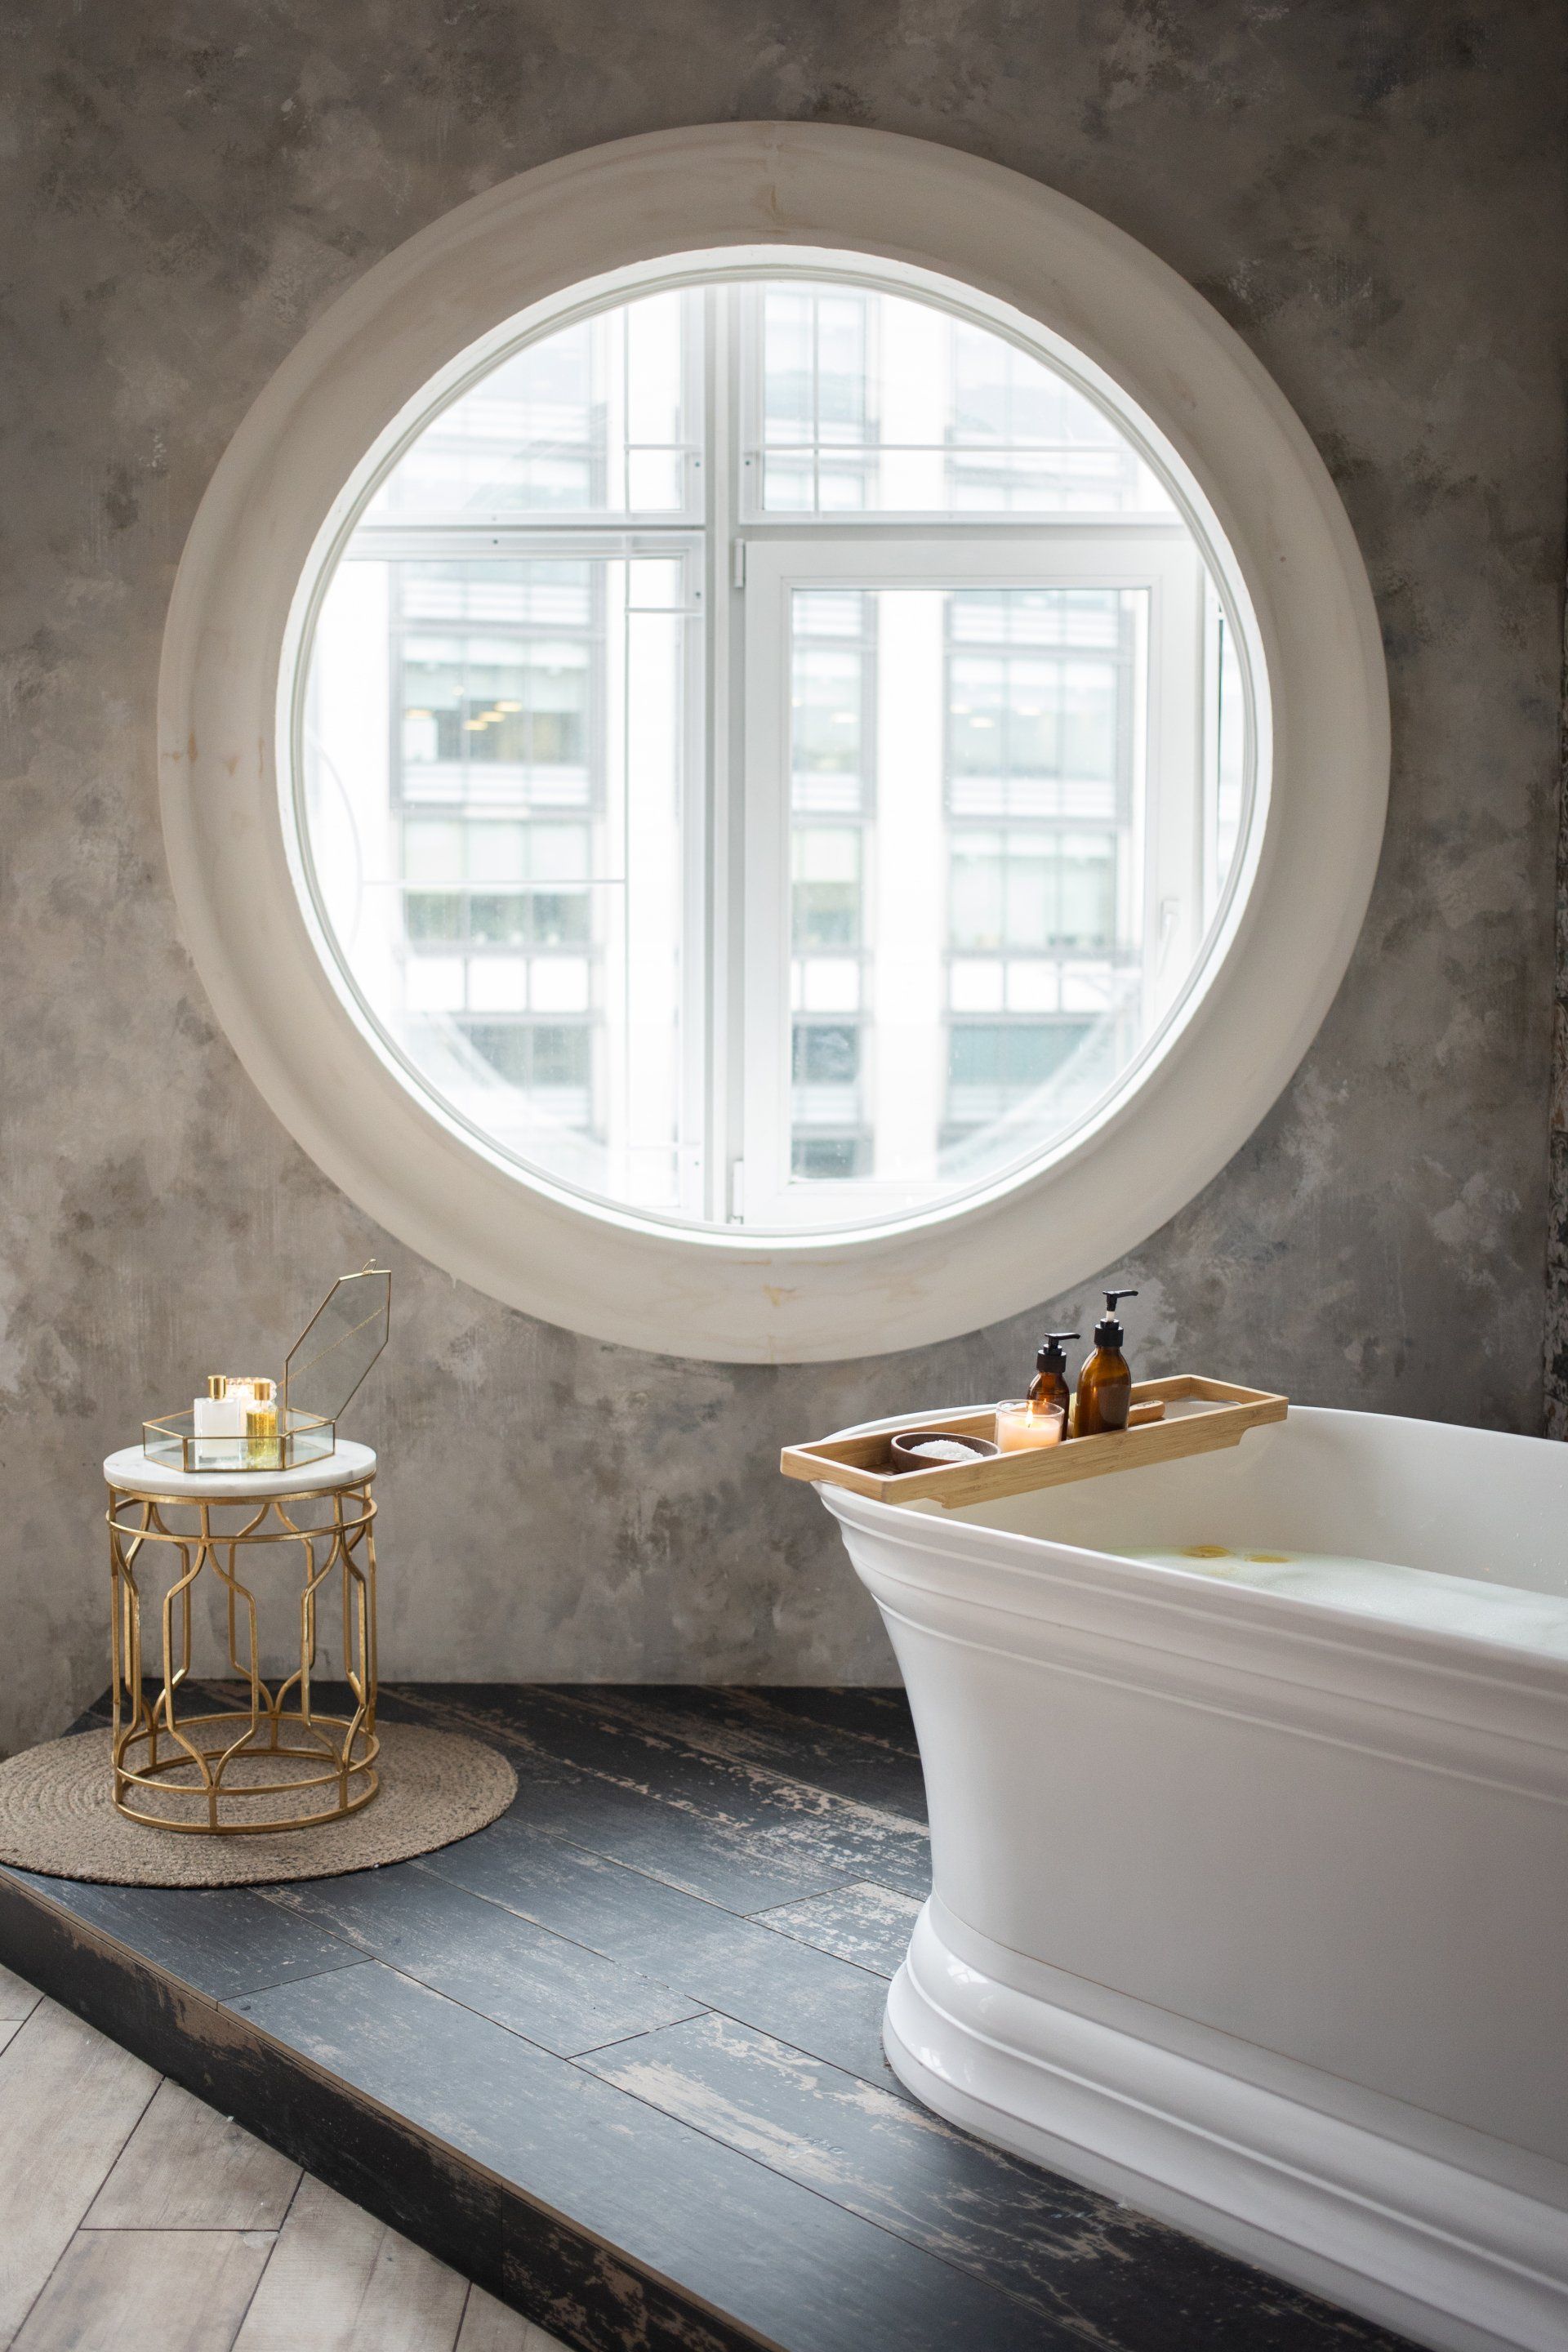 How to Design a Perfect Bathroom: The Essentials of Bathroom Layout and Bath Design